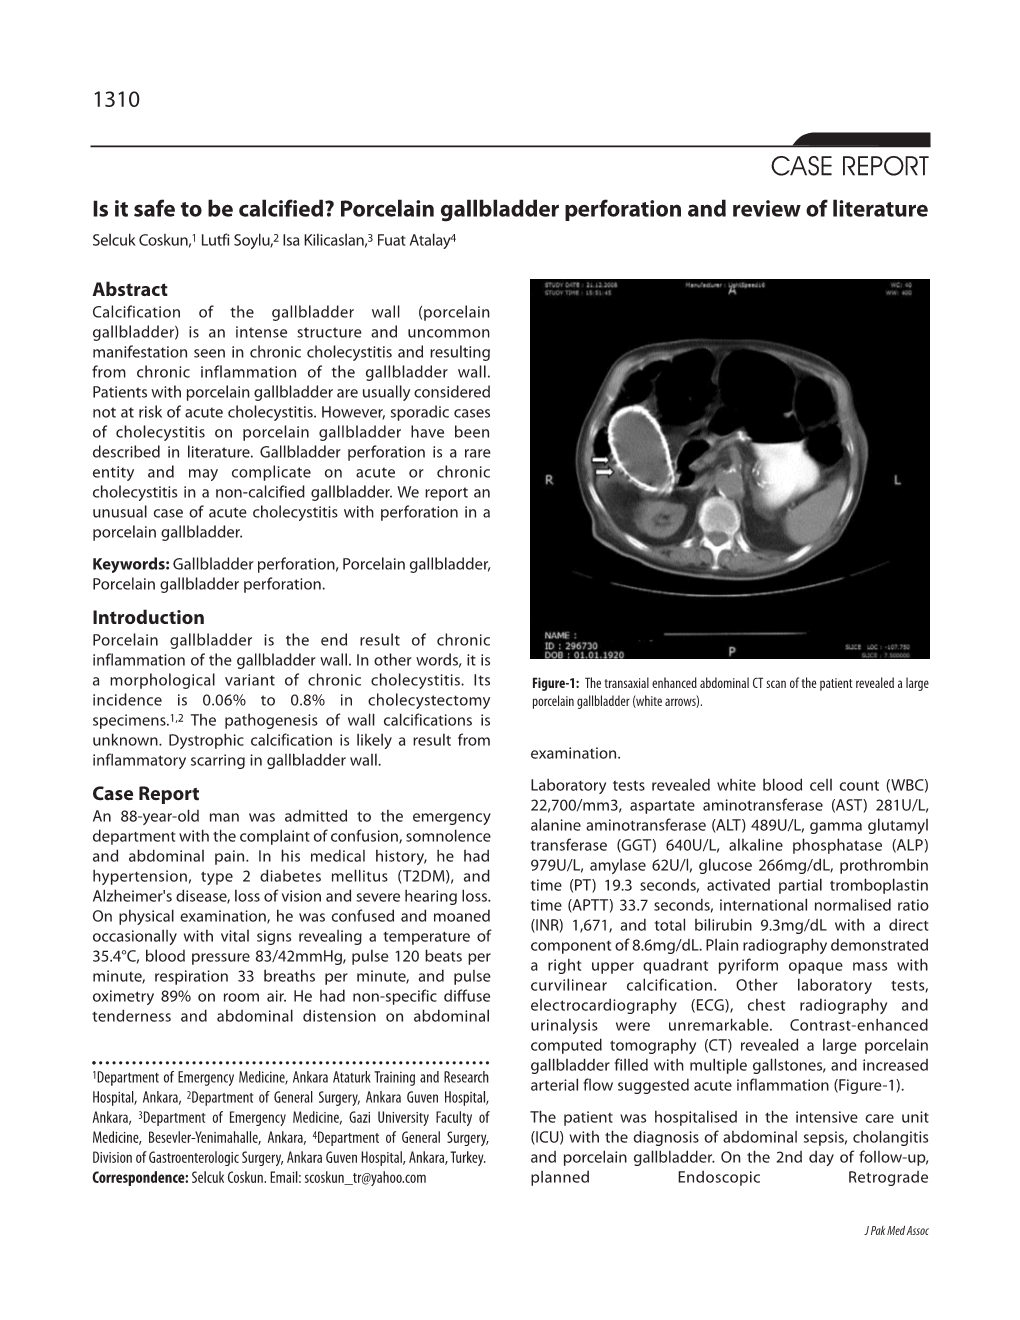 CASE REPORT Is It Safe to Be Calcified? Porcelain Gallbladder Perforation and Review of Literature Selcuk Coskun,1 Lutfi Soylu,2 Isa Kilicaslan,3 Fuat Atalay4